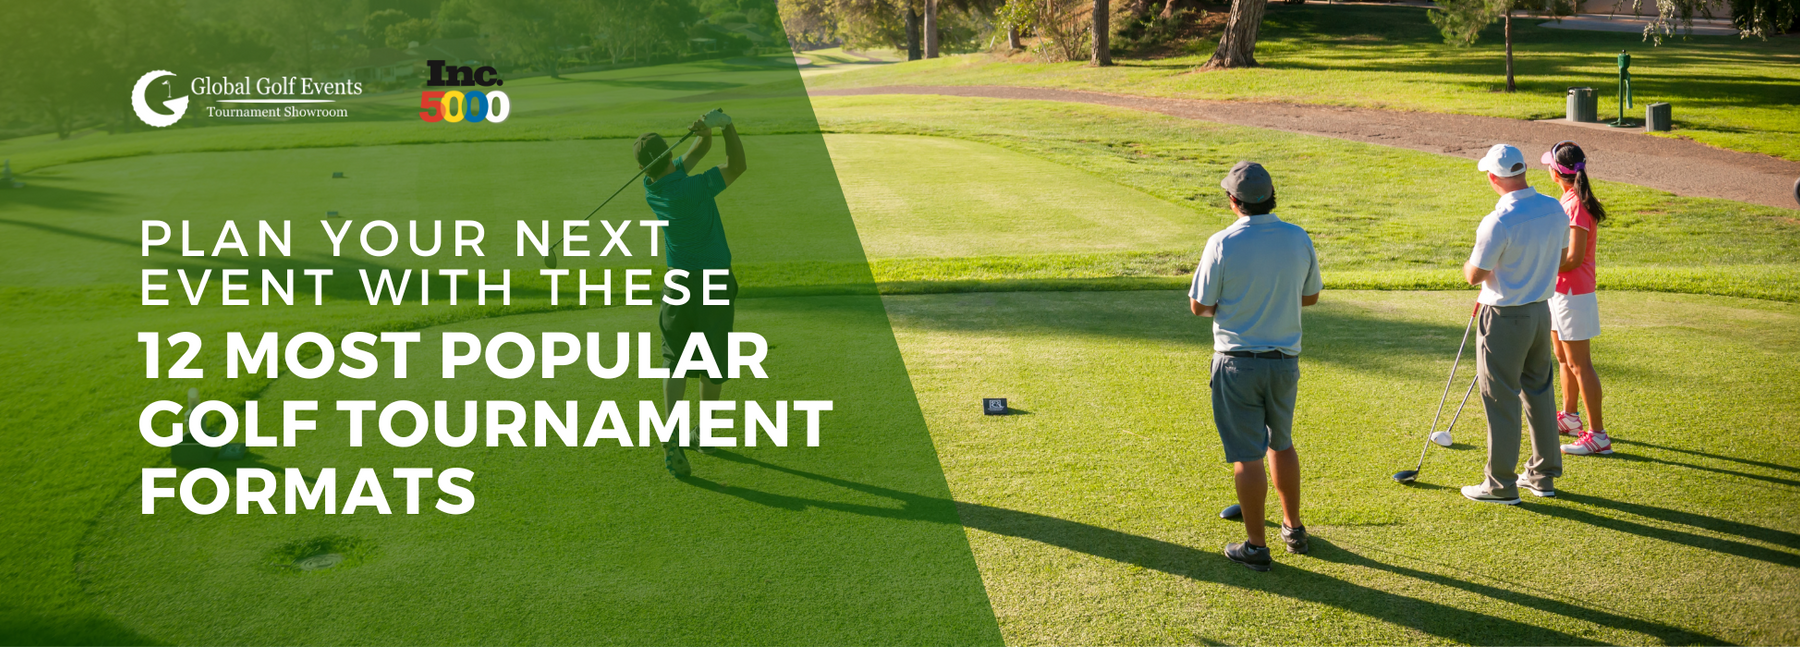 Plan Your Next Event With These 12 Most Popular Golf Tournament Formats